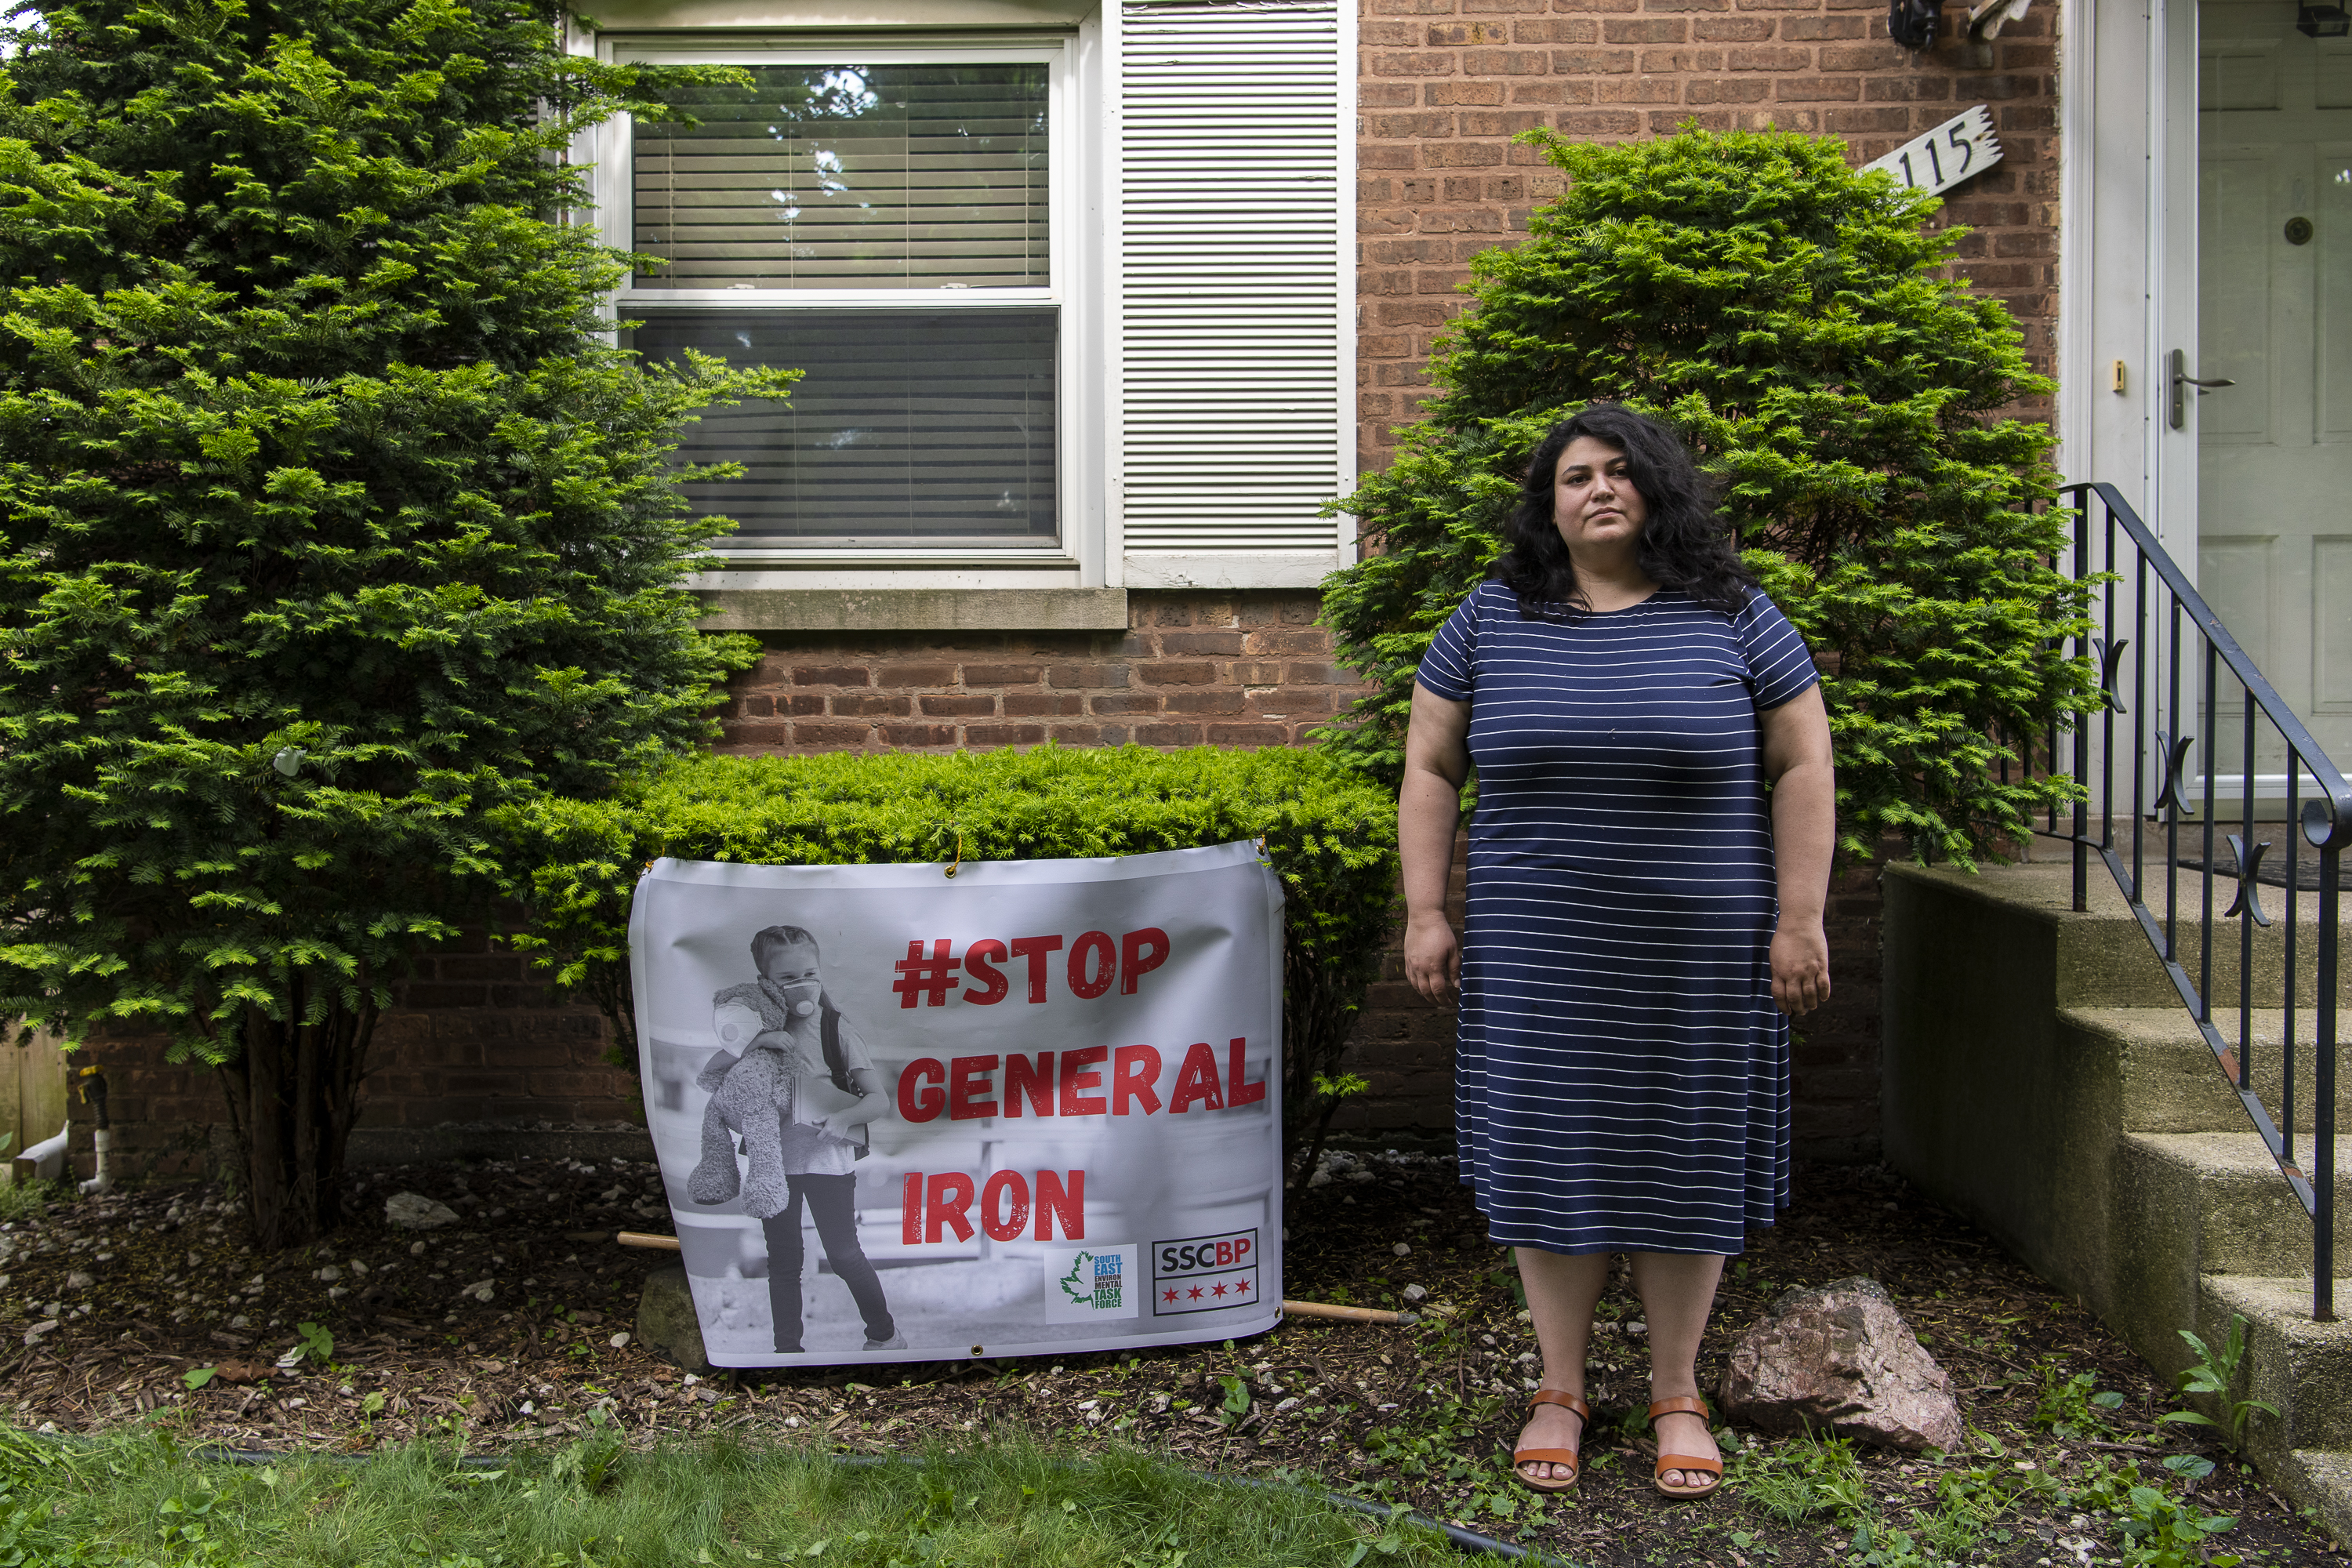 Gina Ramirez, a community organizer and resident of the Southeast Side, is concerned about General Iron’s plan to open a new metal shredding plant near her home.